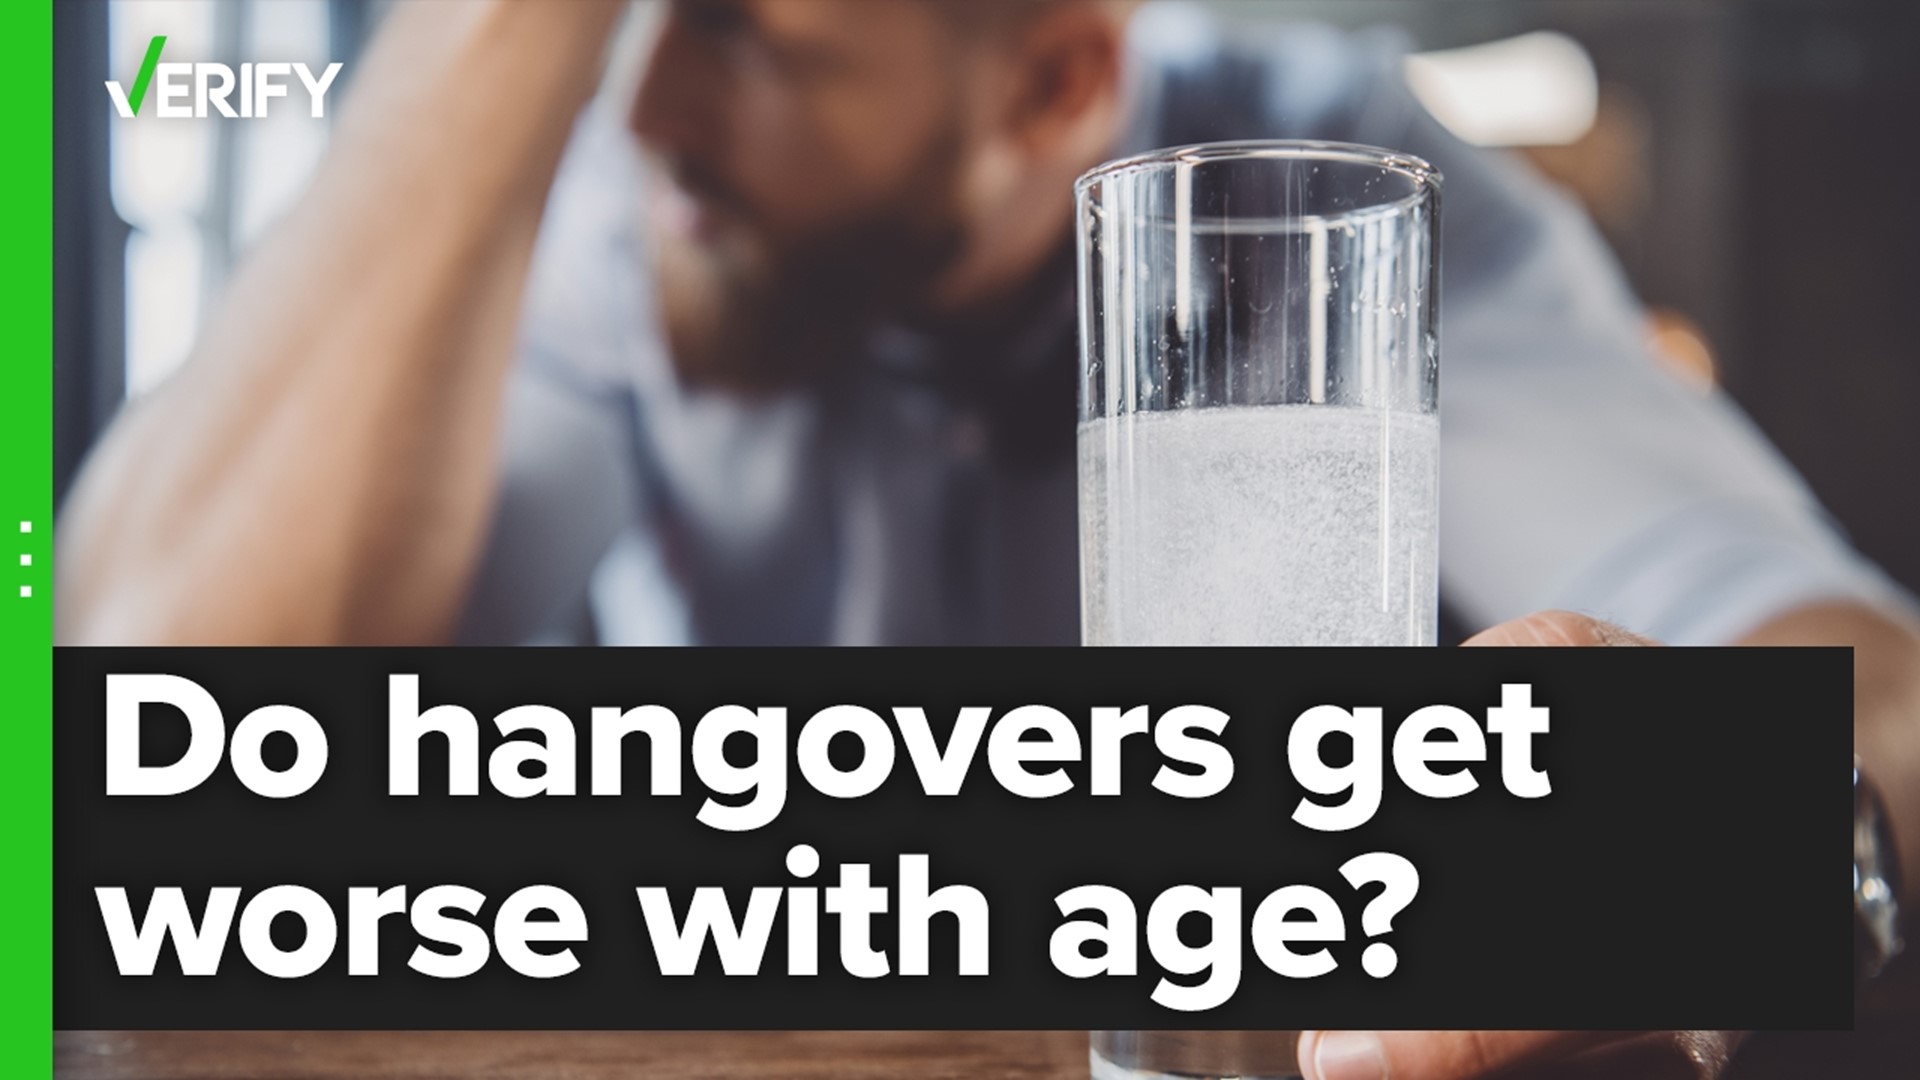 There is proof that age decreases the body’s ability to process alcohol. But there are a variety of factors that can cause bad hangovers, regardless of age.